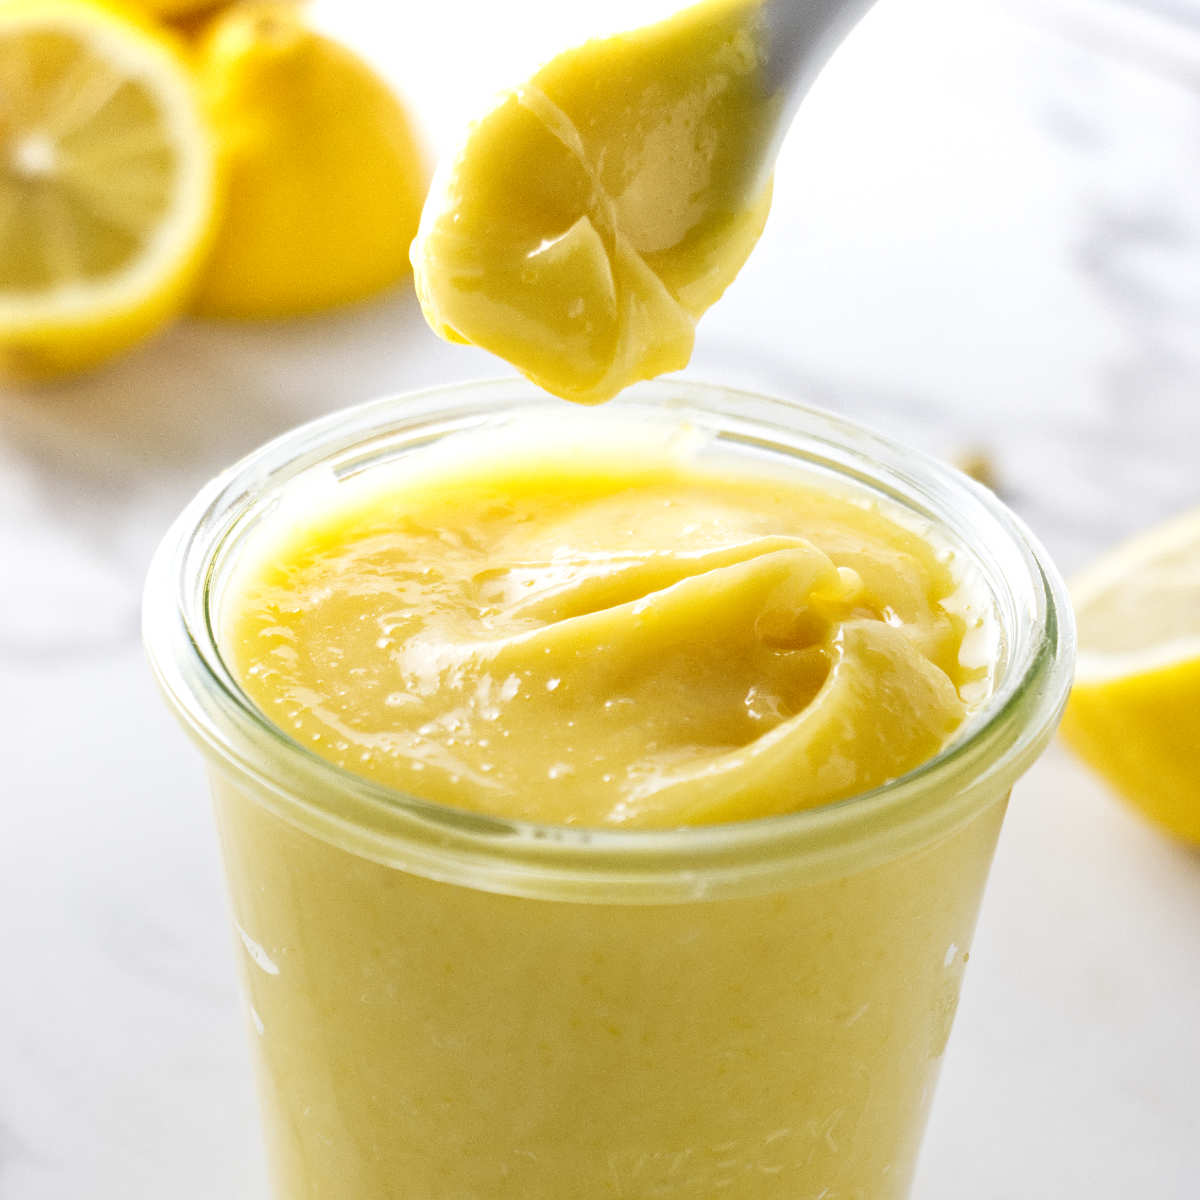 Lemon curd made with egg yolks only is thick and clinging to a spoon.